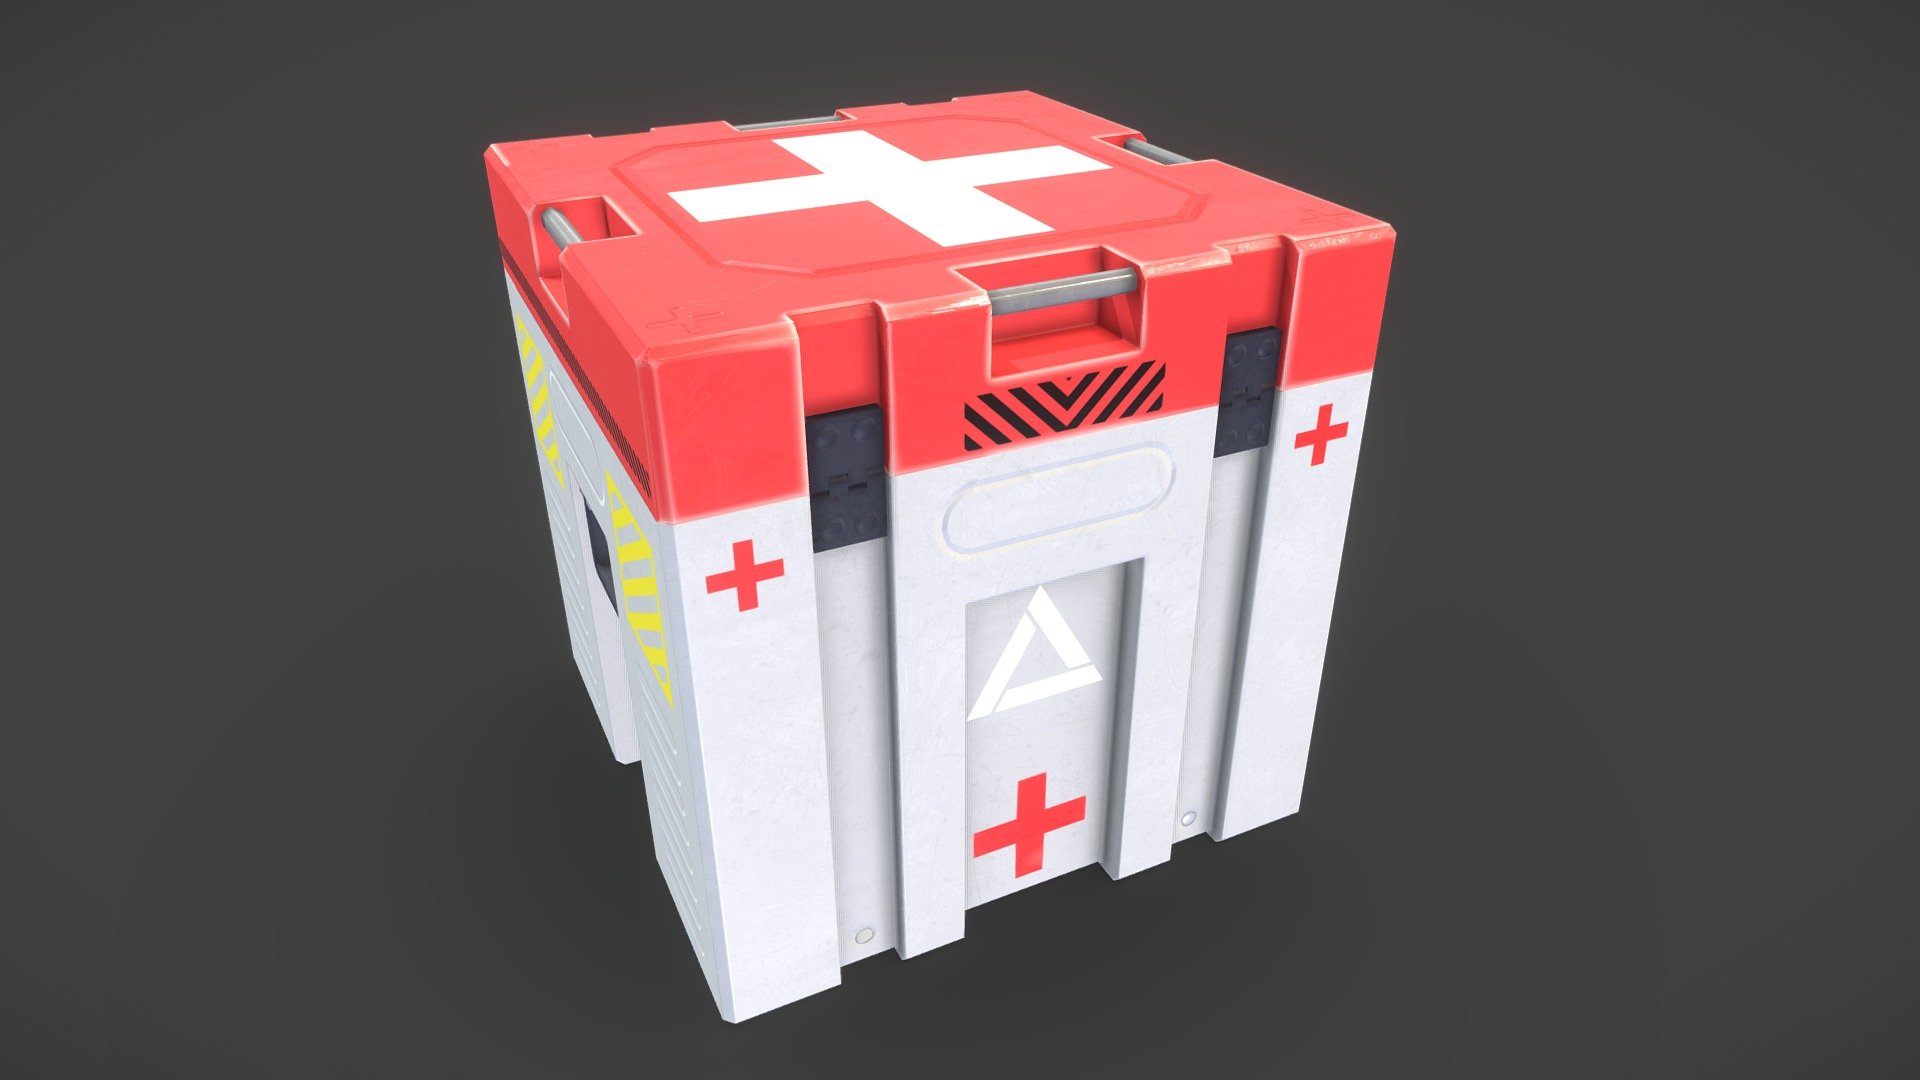 Sci Fi Crate First Aid Low-Poly &amp; Game-Ready 3D Model Asset For Games And CGI Videos.
Made In Blender 3d model